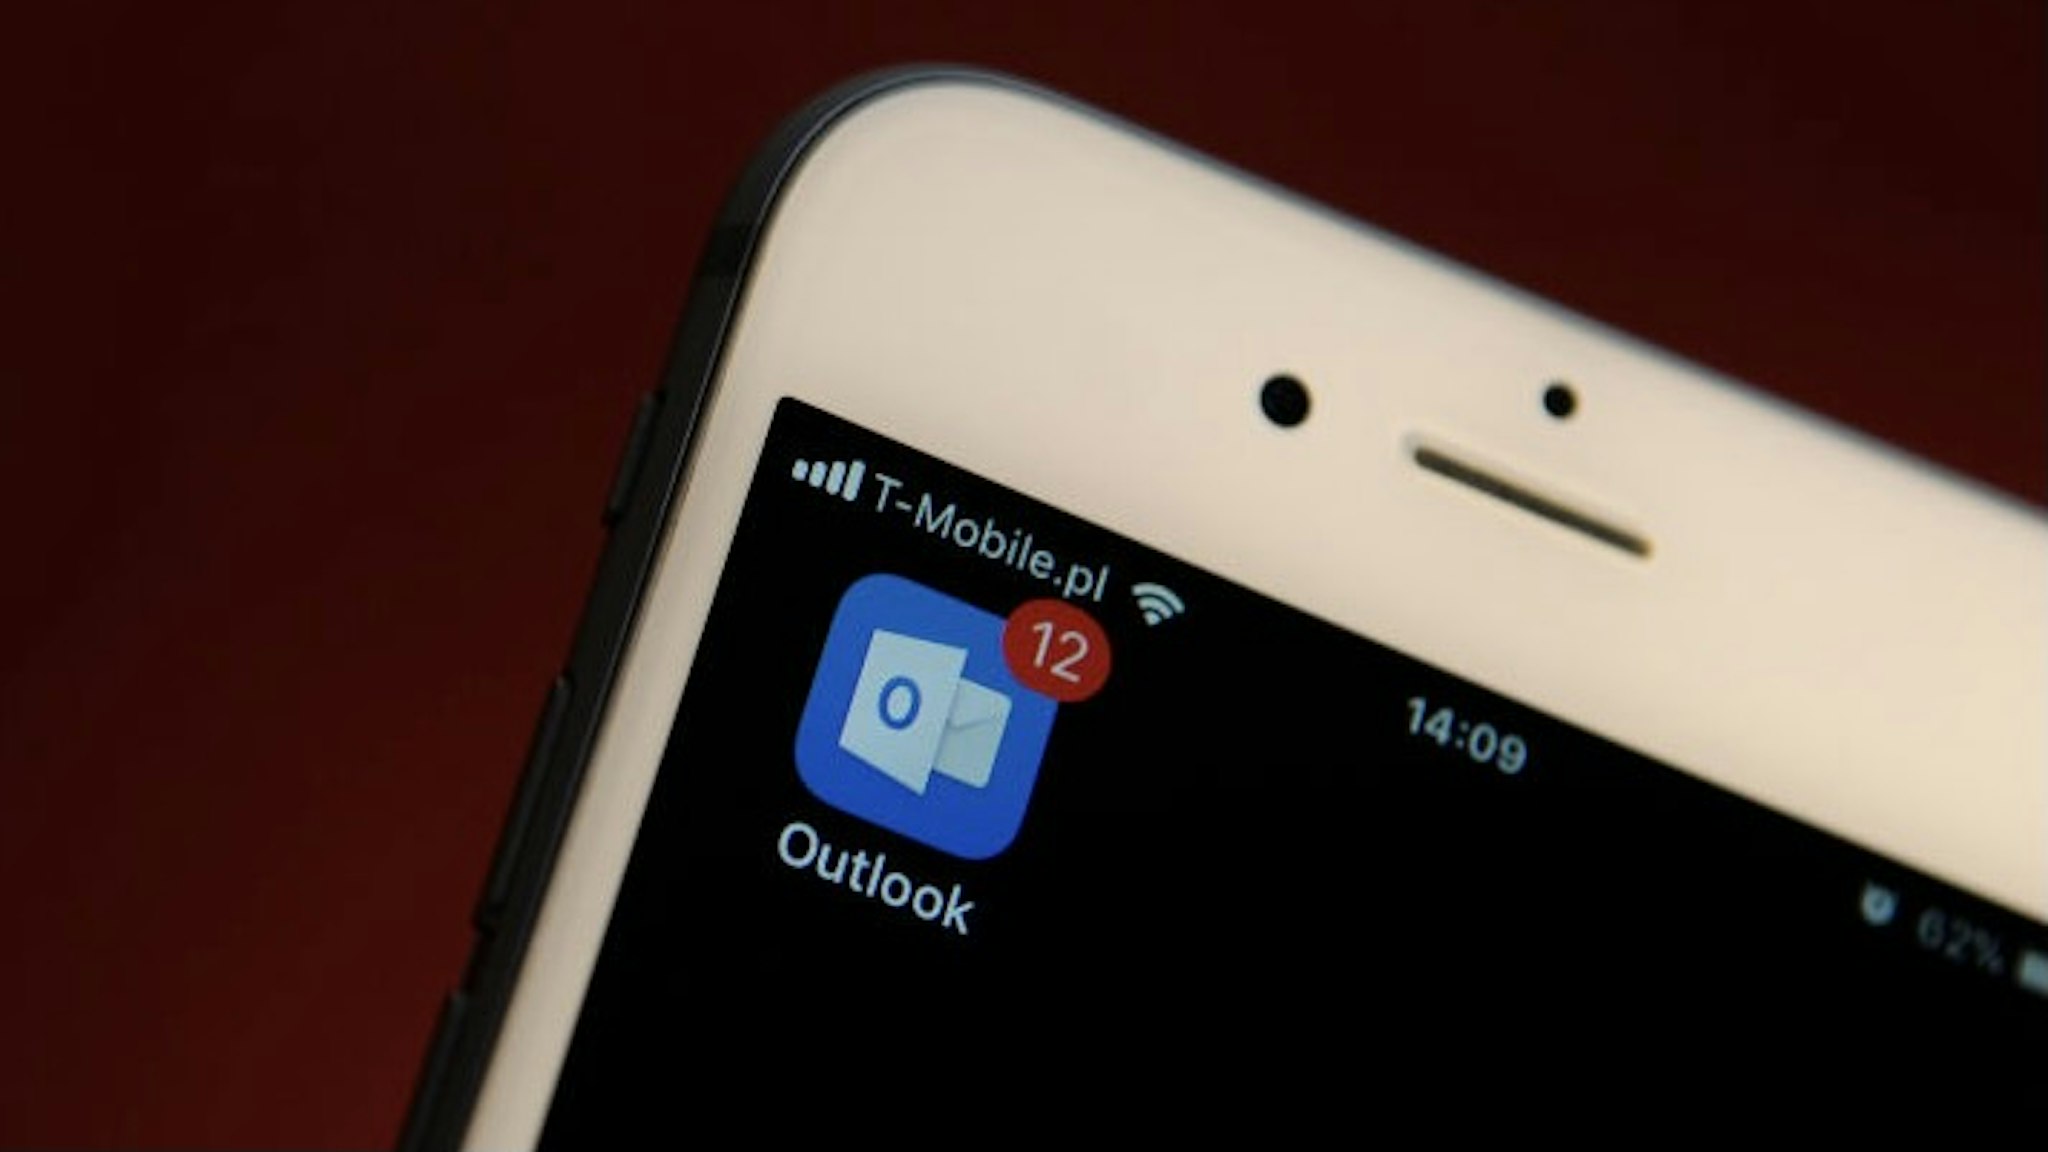 The Outlook email application is seen on an iPhone on October 25, 2017. (Photo by Jaap Arriens/NurPhoto)